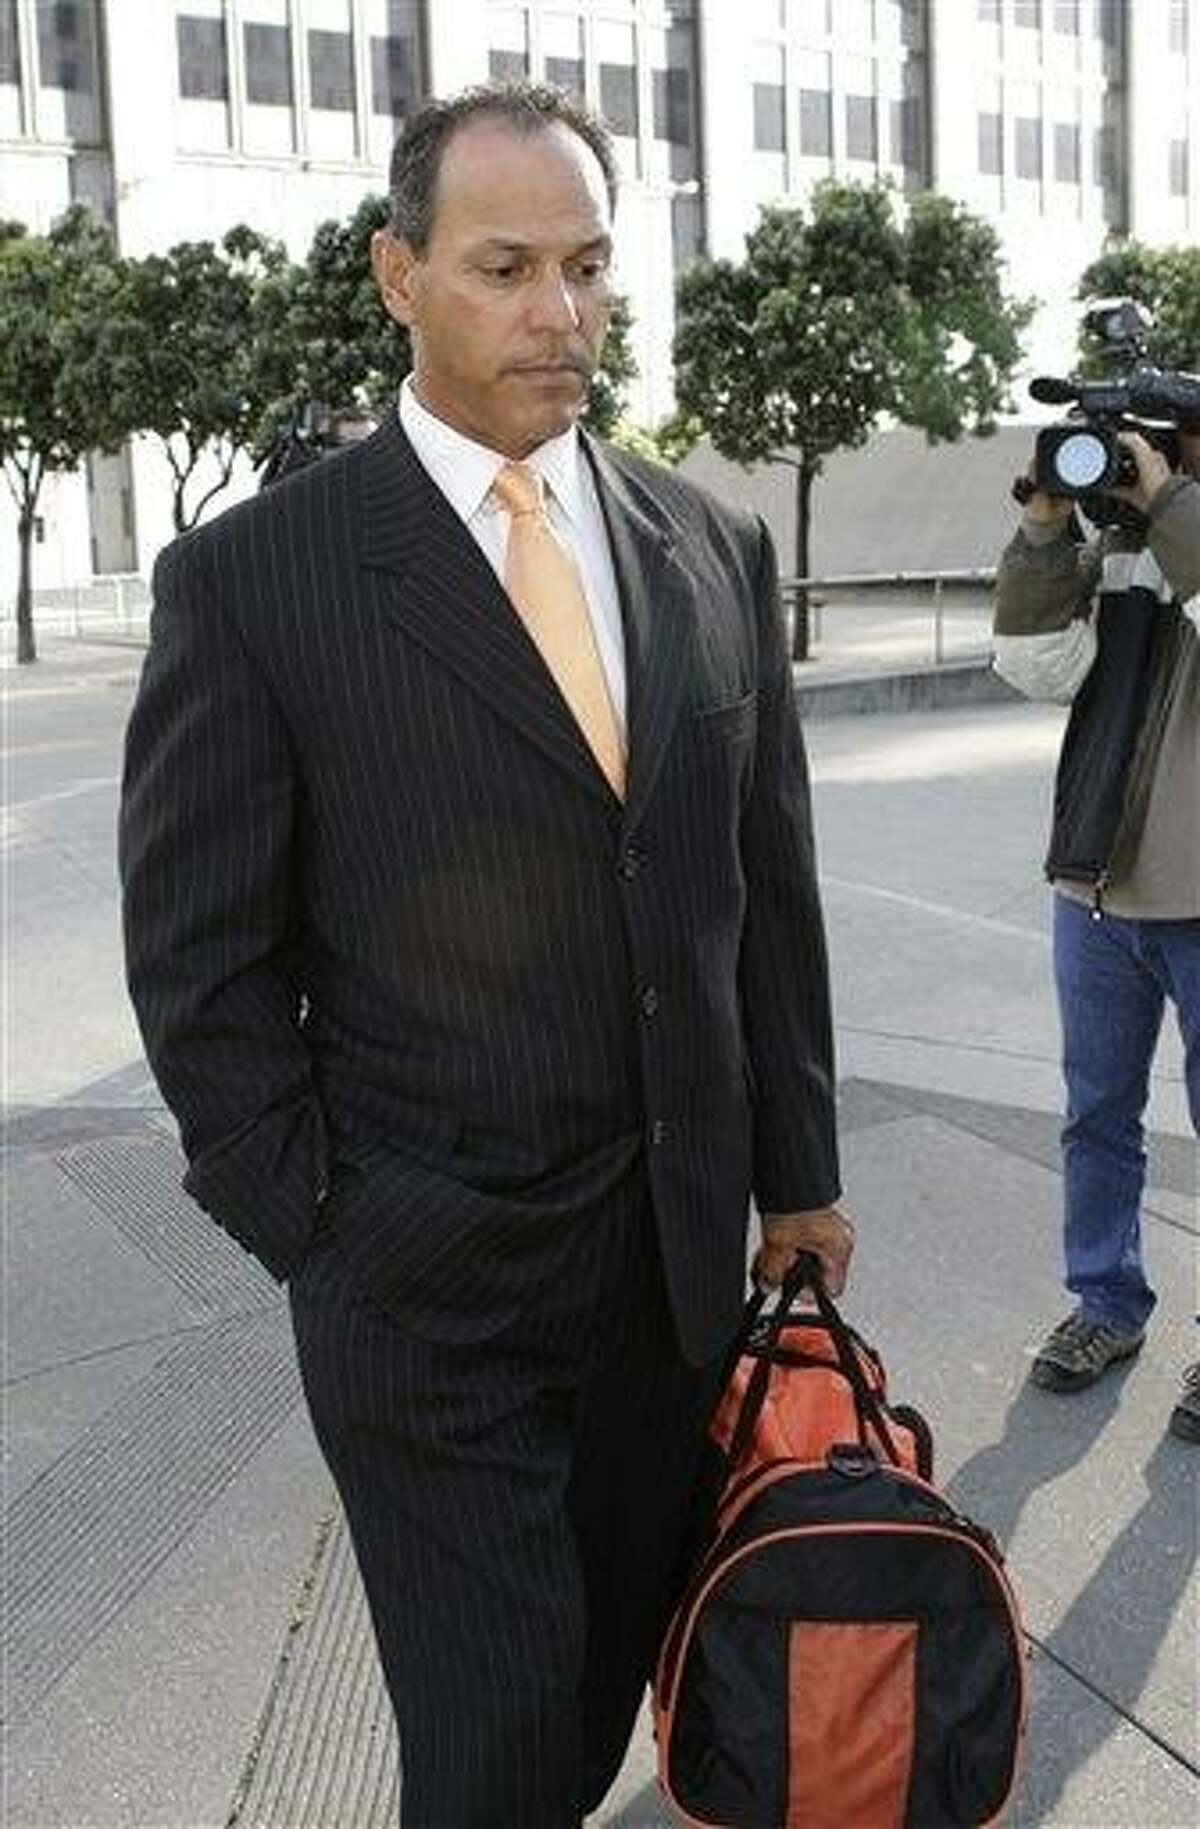 Jason and Jeremy Giambi expected to be called in Barry Bonds trial